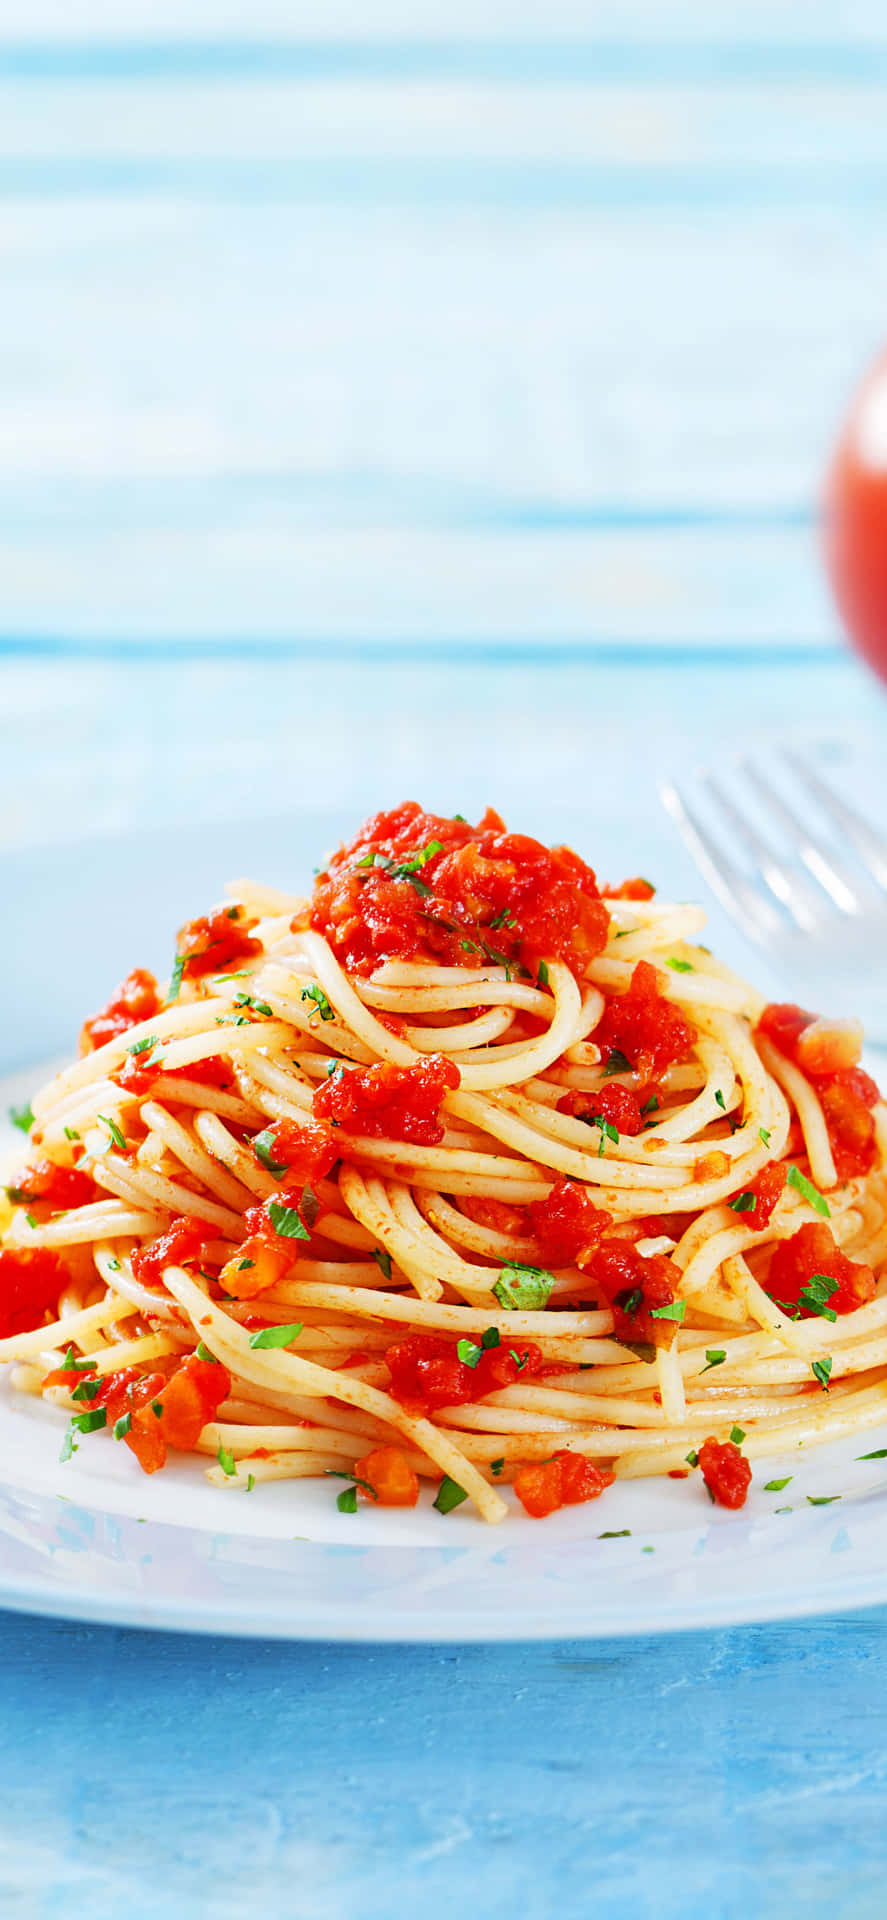 Android Pasta Background Plate Of Red Sauce Spaghetti